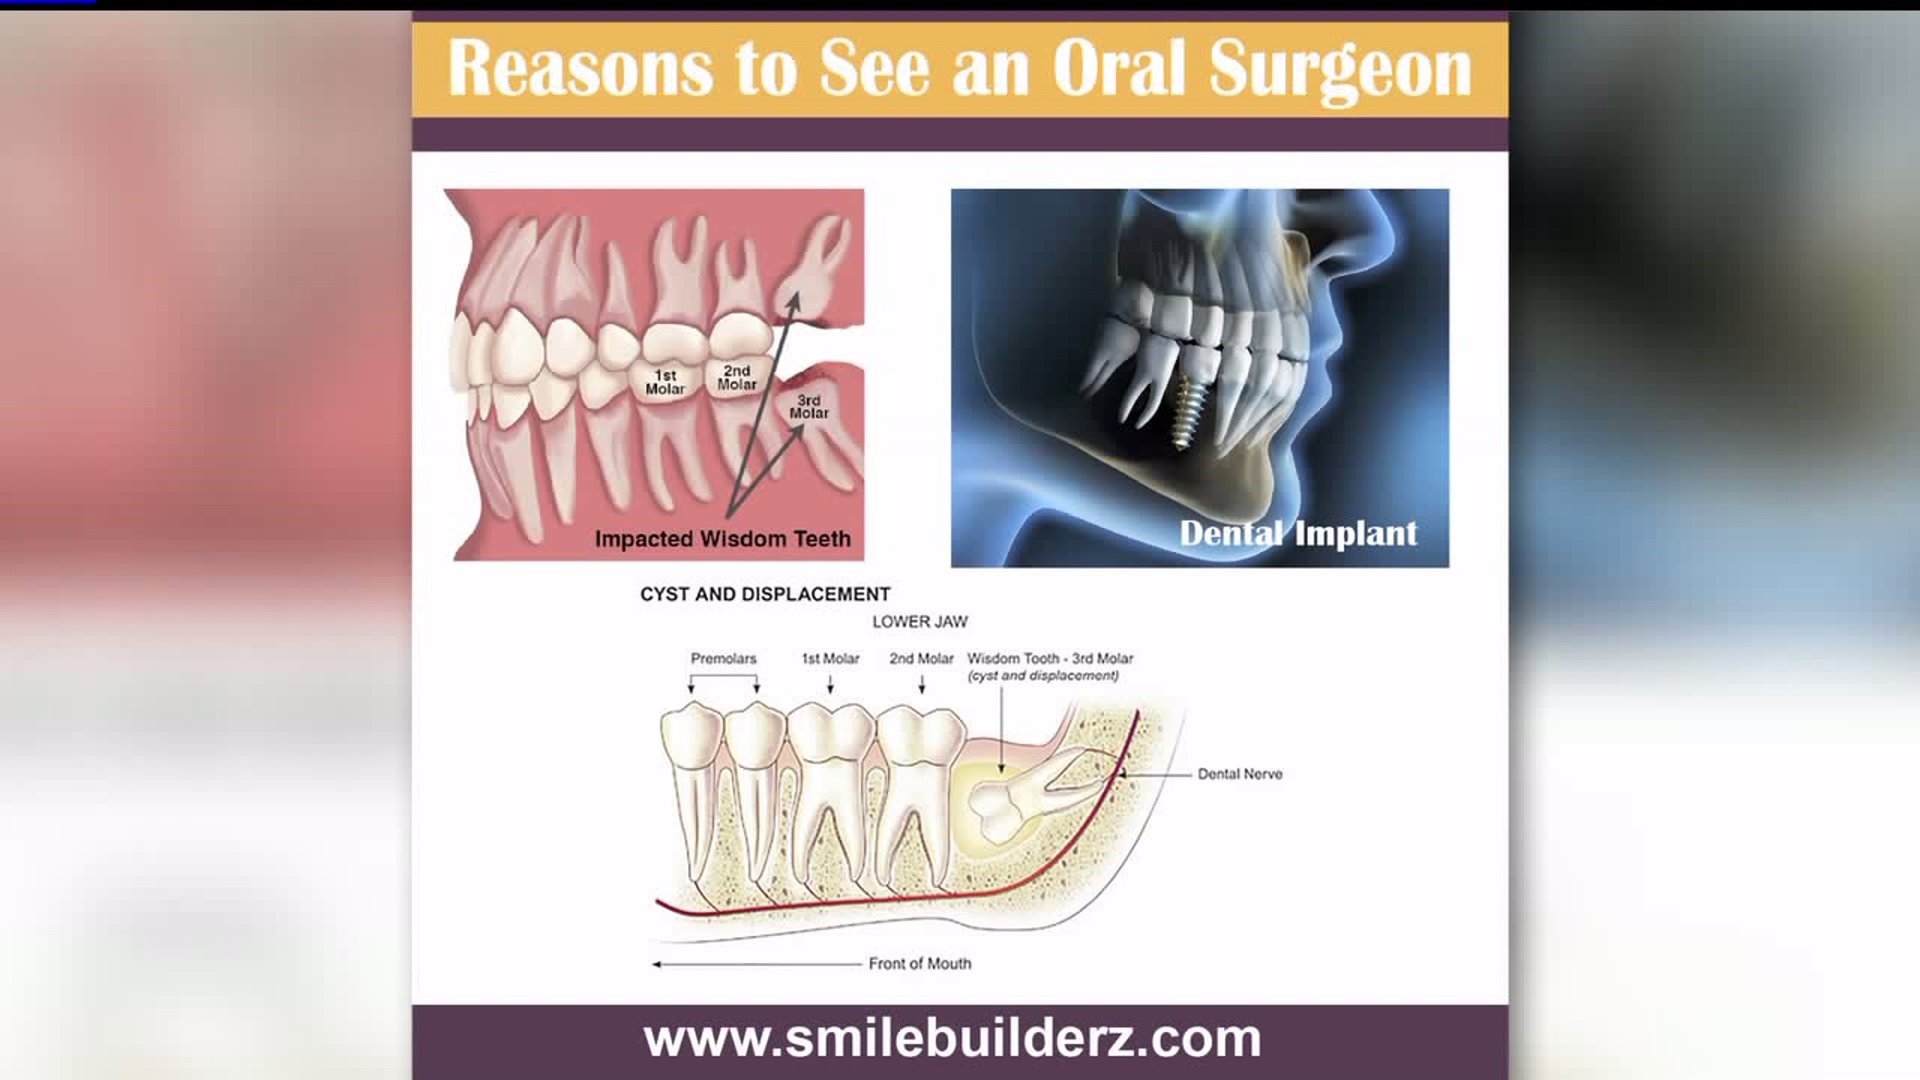 Oral surgery is an option to fix a number of possible issues